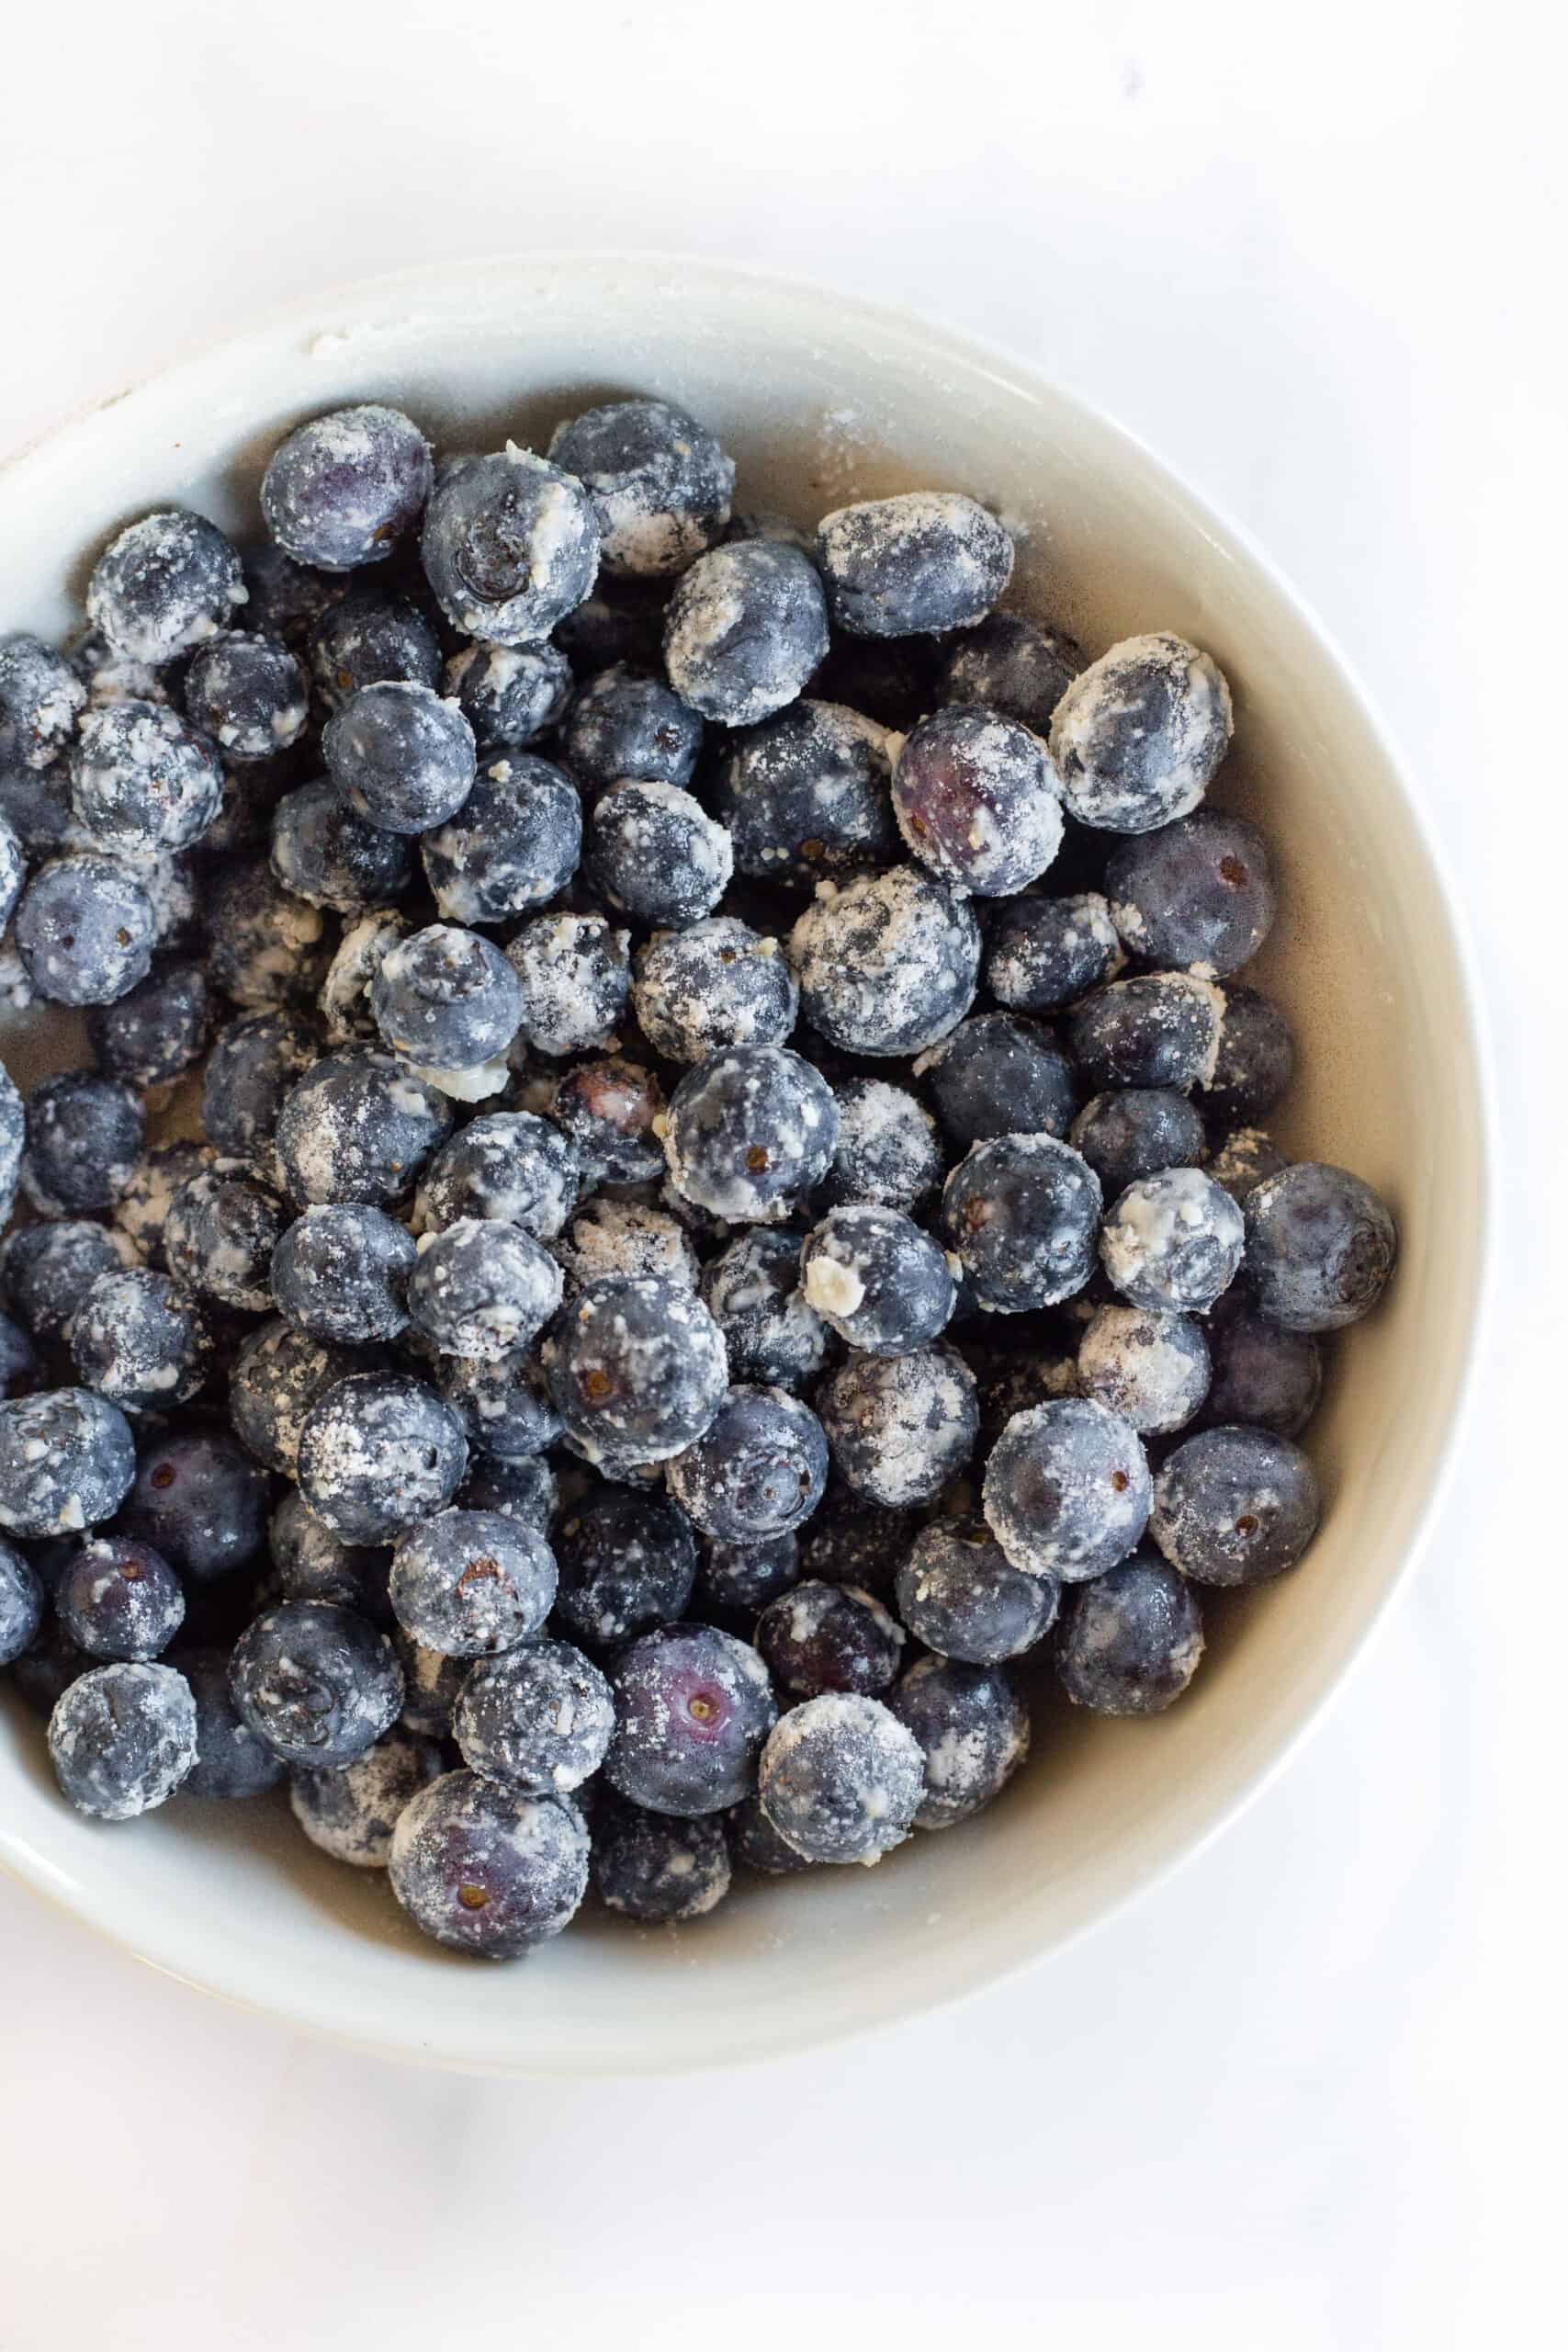 Flour-coated blueberries in a white bowl.